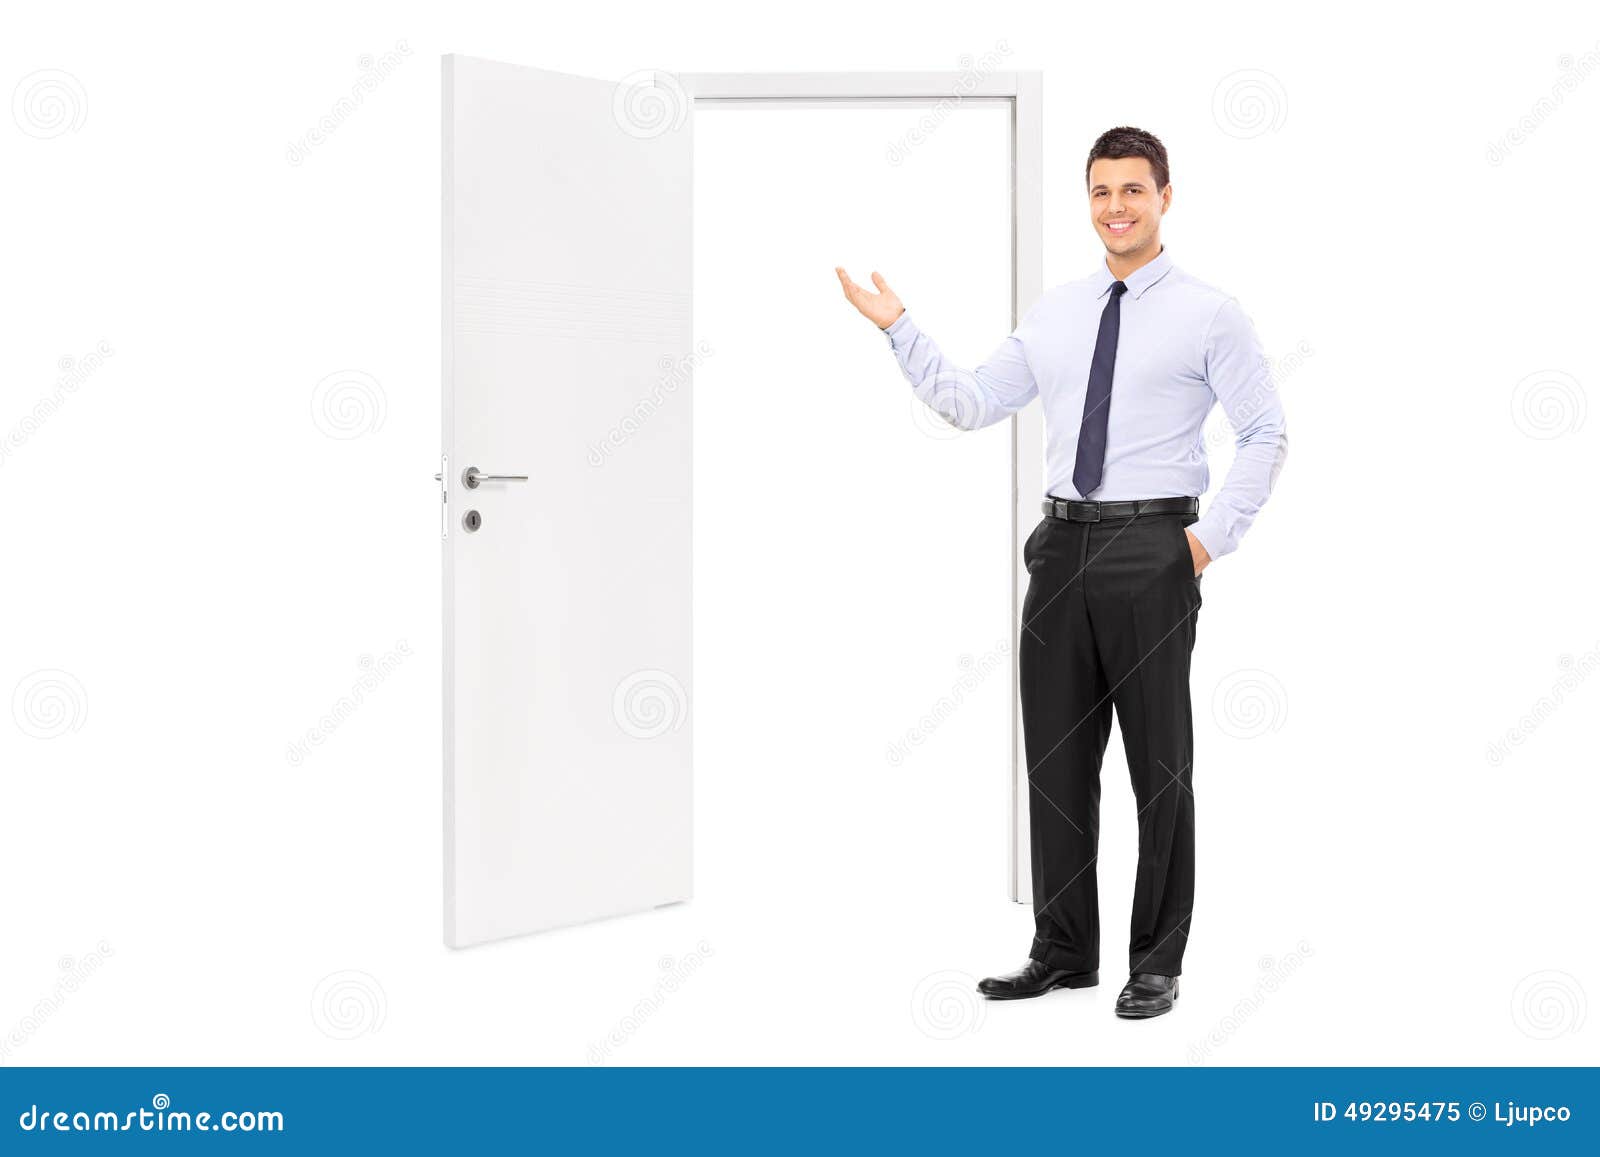 young-man-pointing-towards-opened-door-full-length-portrait-isolated-white-background-49295475.jpg